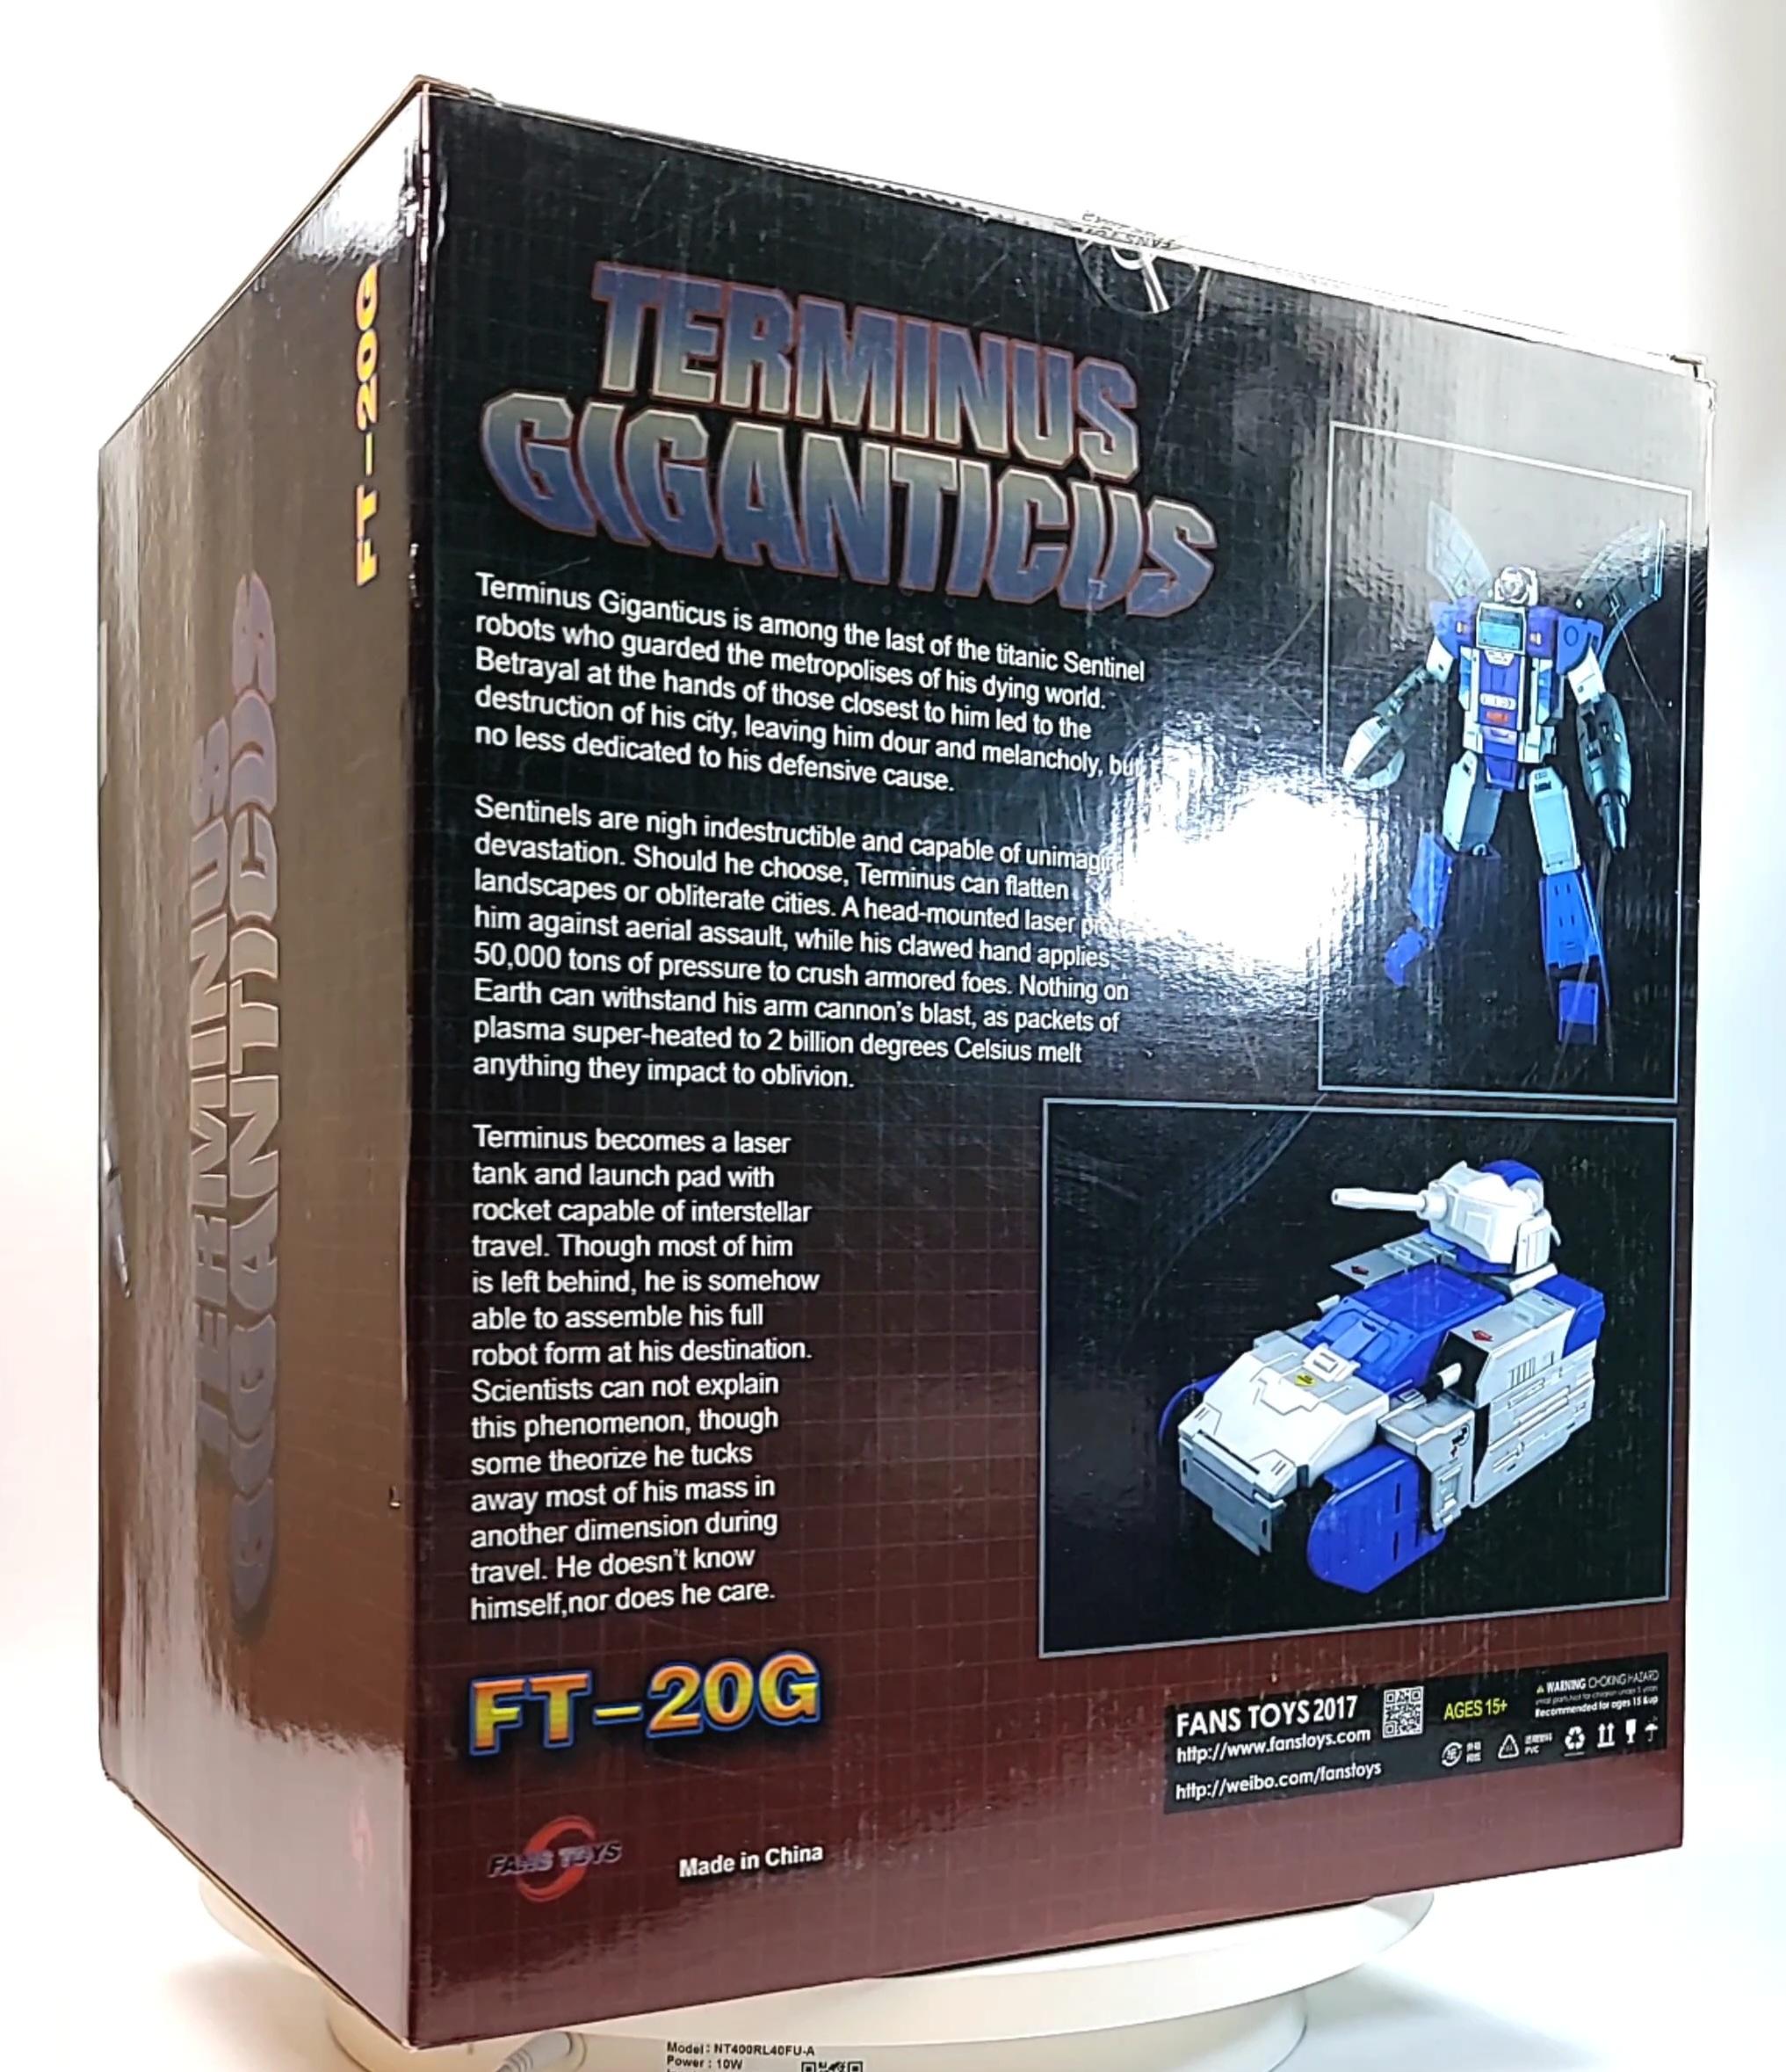 Fans Toys Terminus Giganticus FT20G Omega Supreme BOX ONLY - NO FIGURE